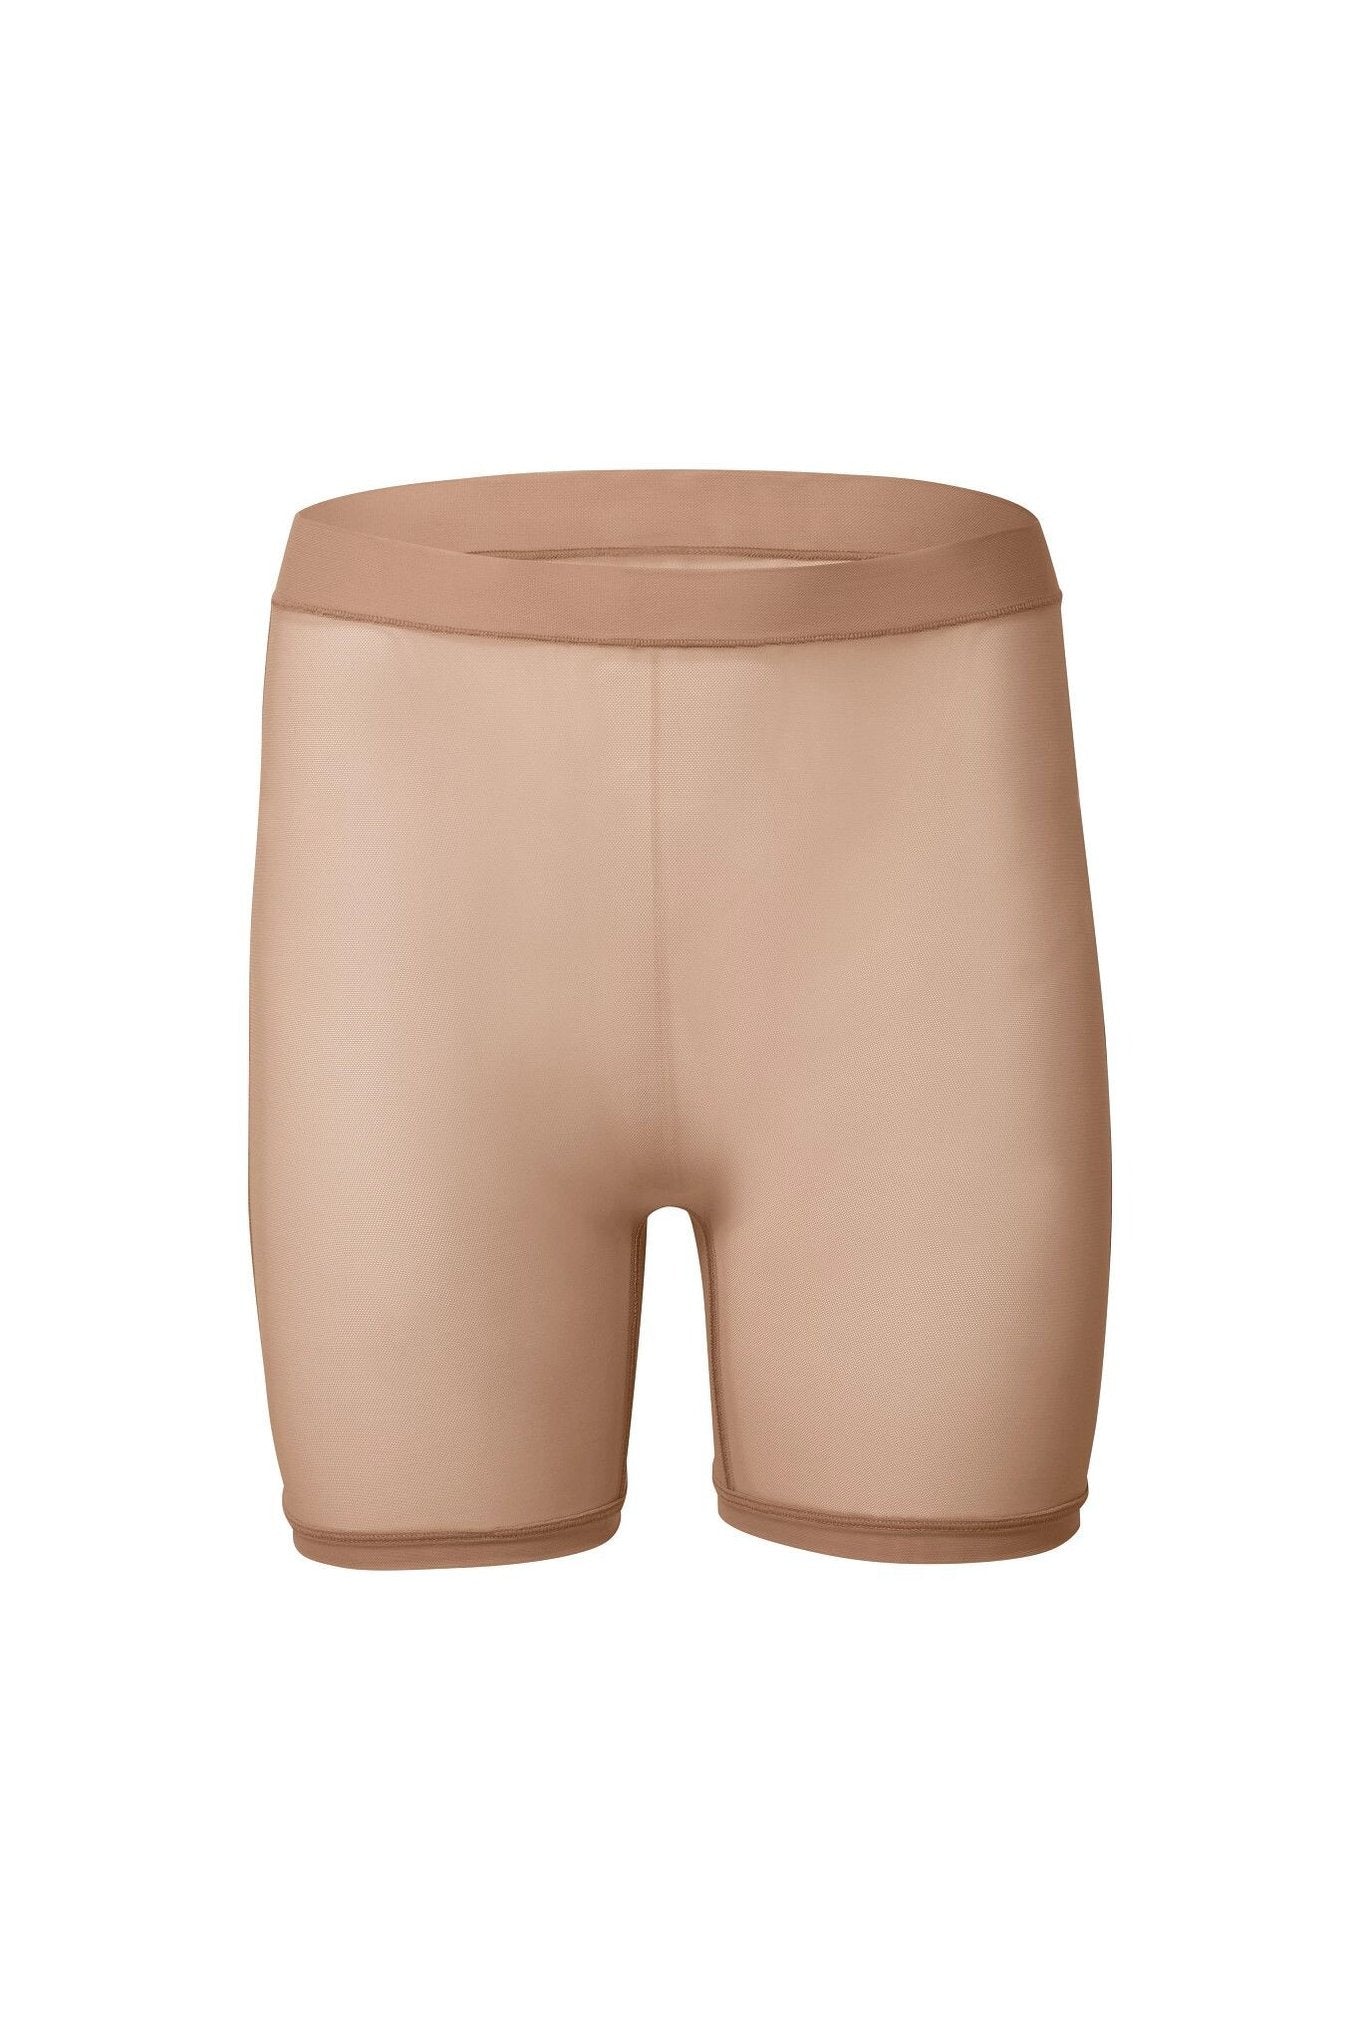 nueskin Dina Mesh High-Rise Shortie in color Macaroon and shape shortie